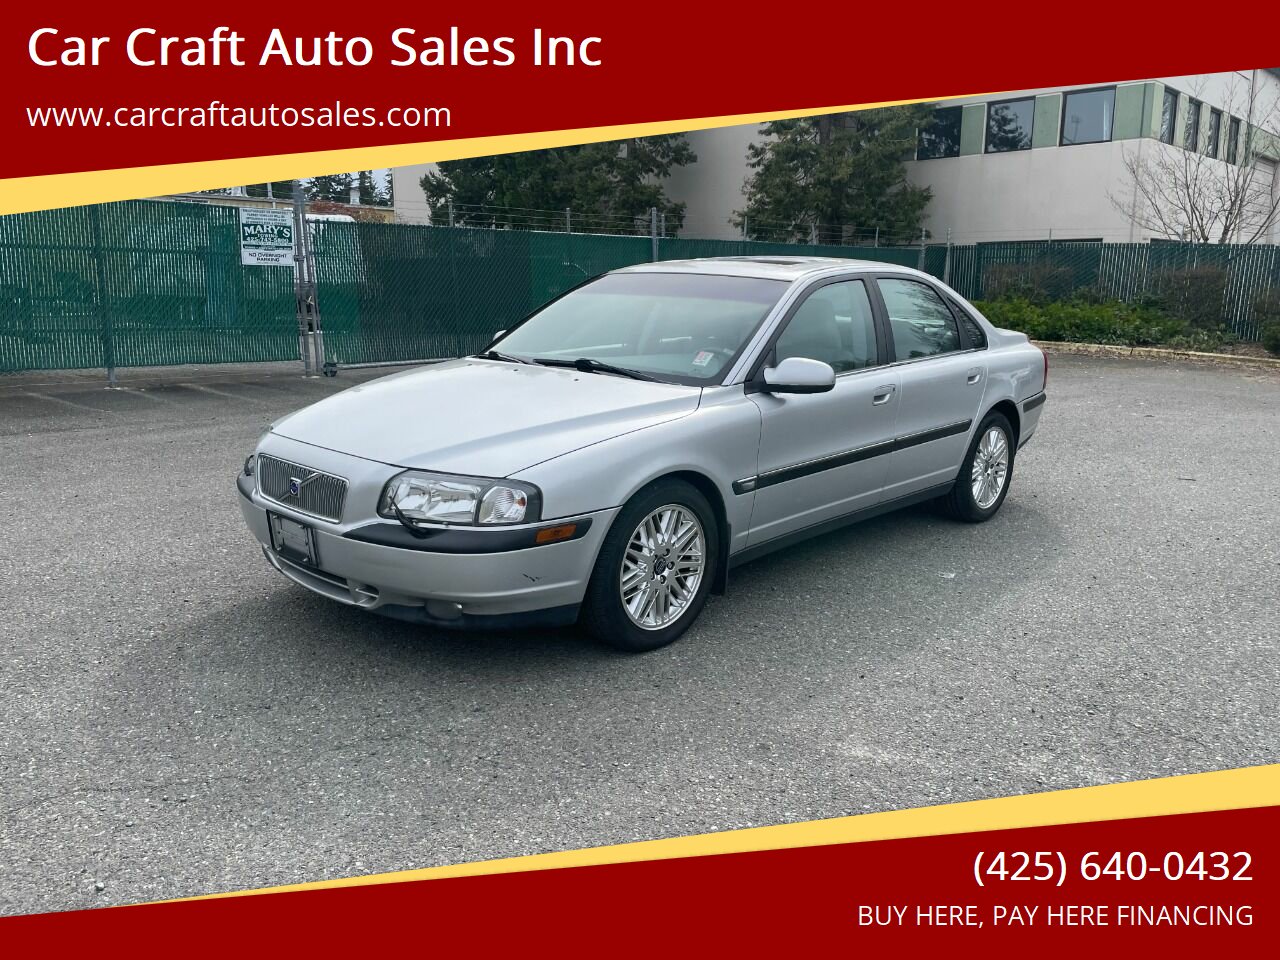 2000 Volvo S80 For Sale - Carsforsale.com®